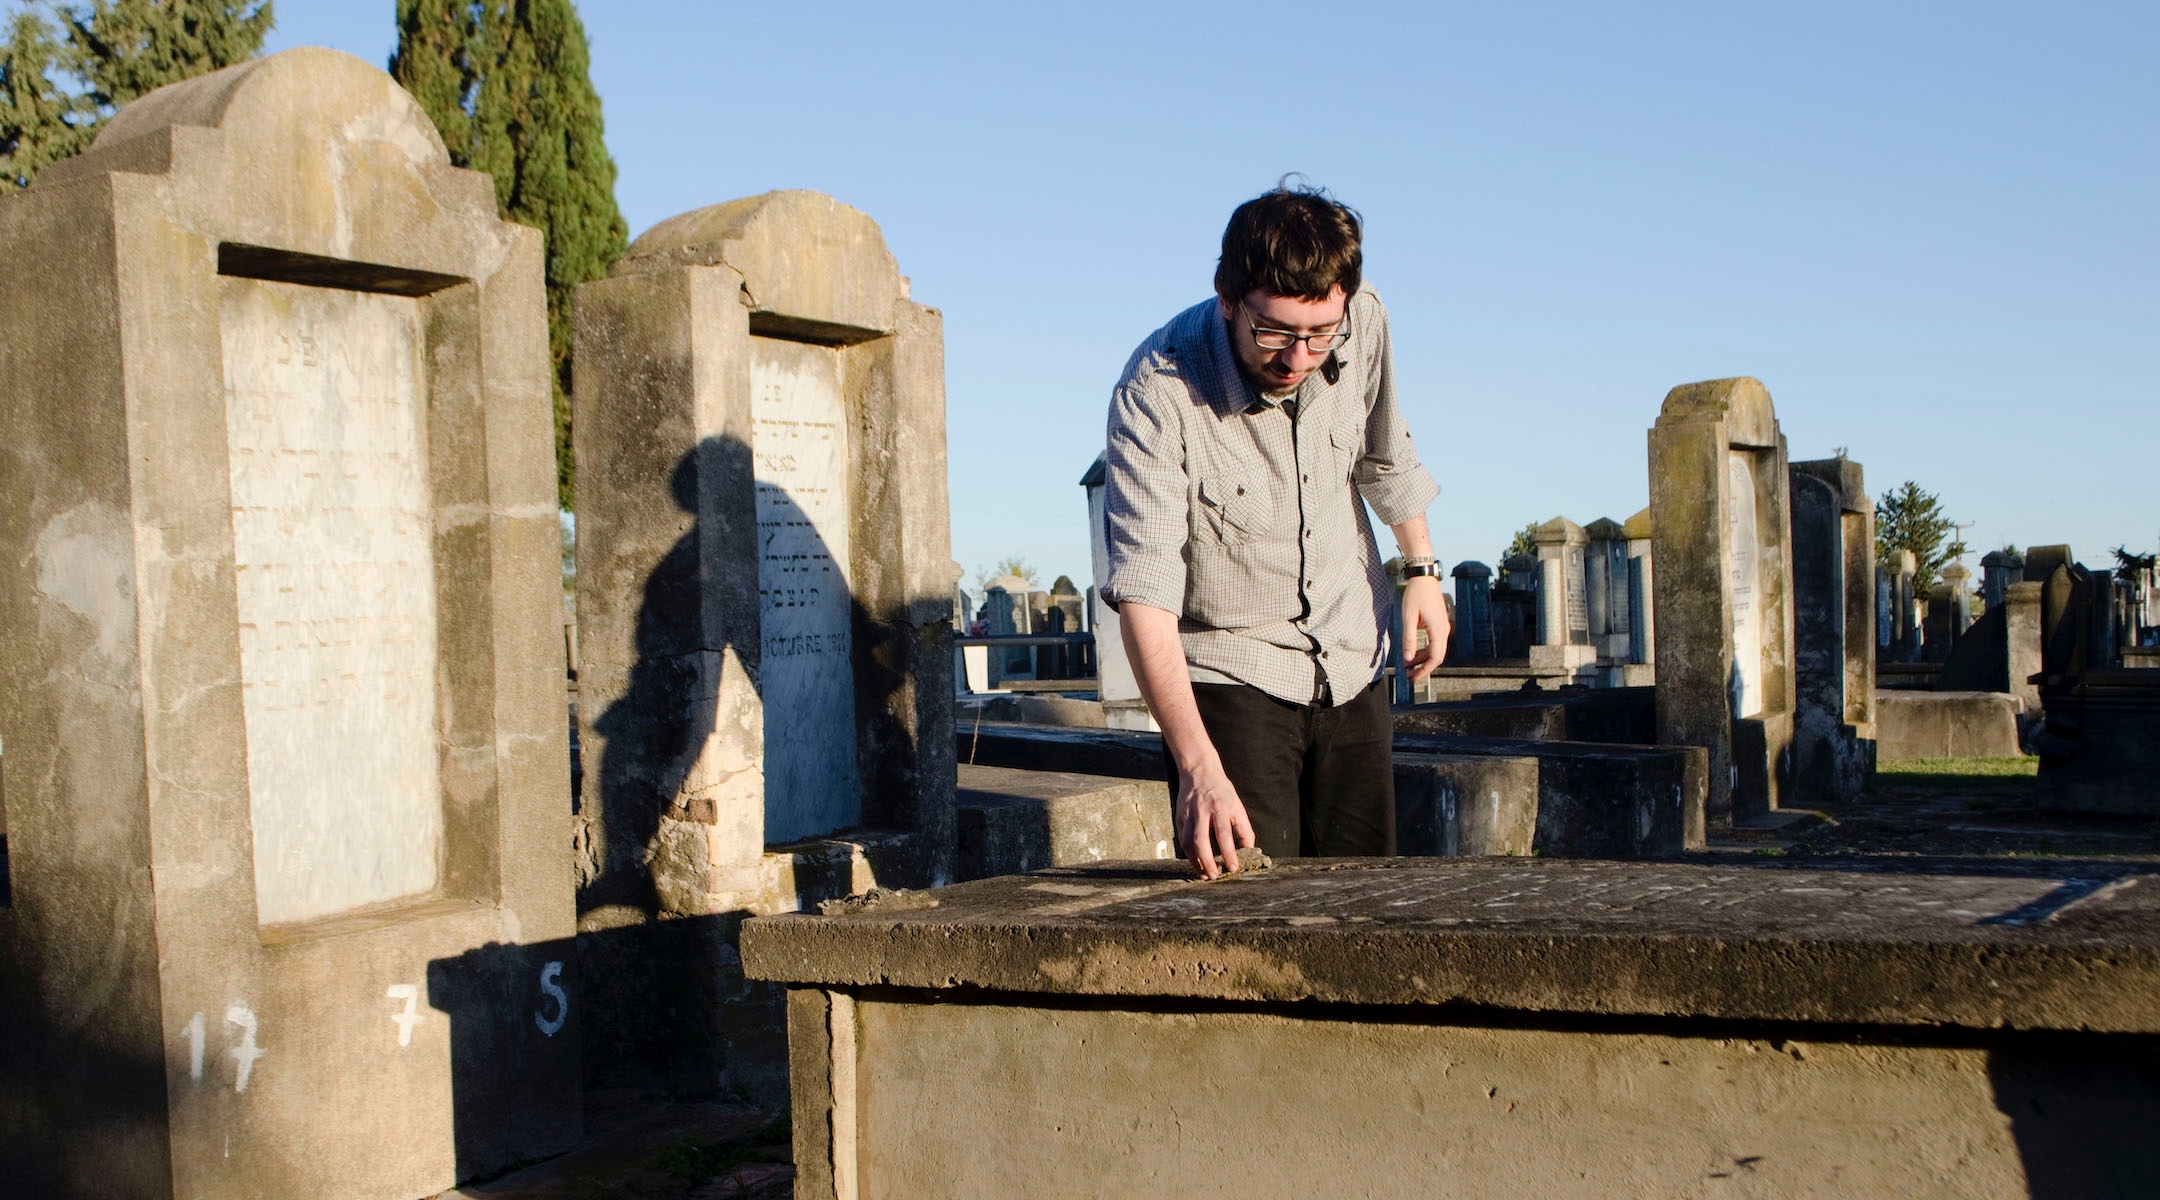 Javier Sinay visits the Jewish cemetery in Moises Ville, Argentina, during a visit to the village in 2013. (Paula Salischiker)